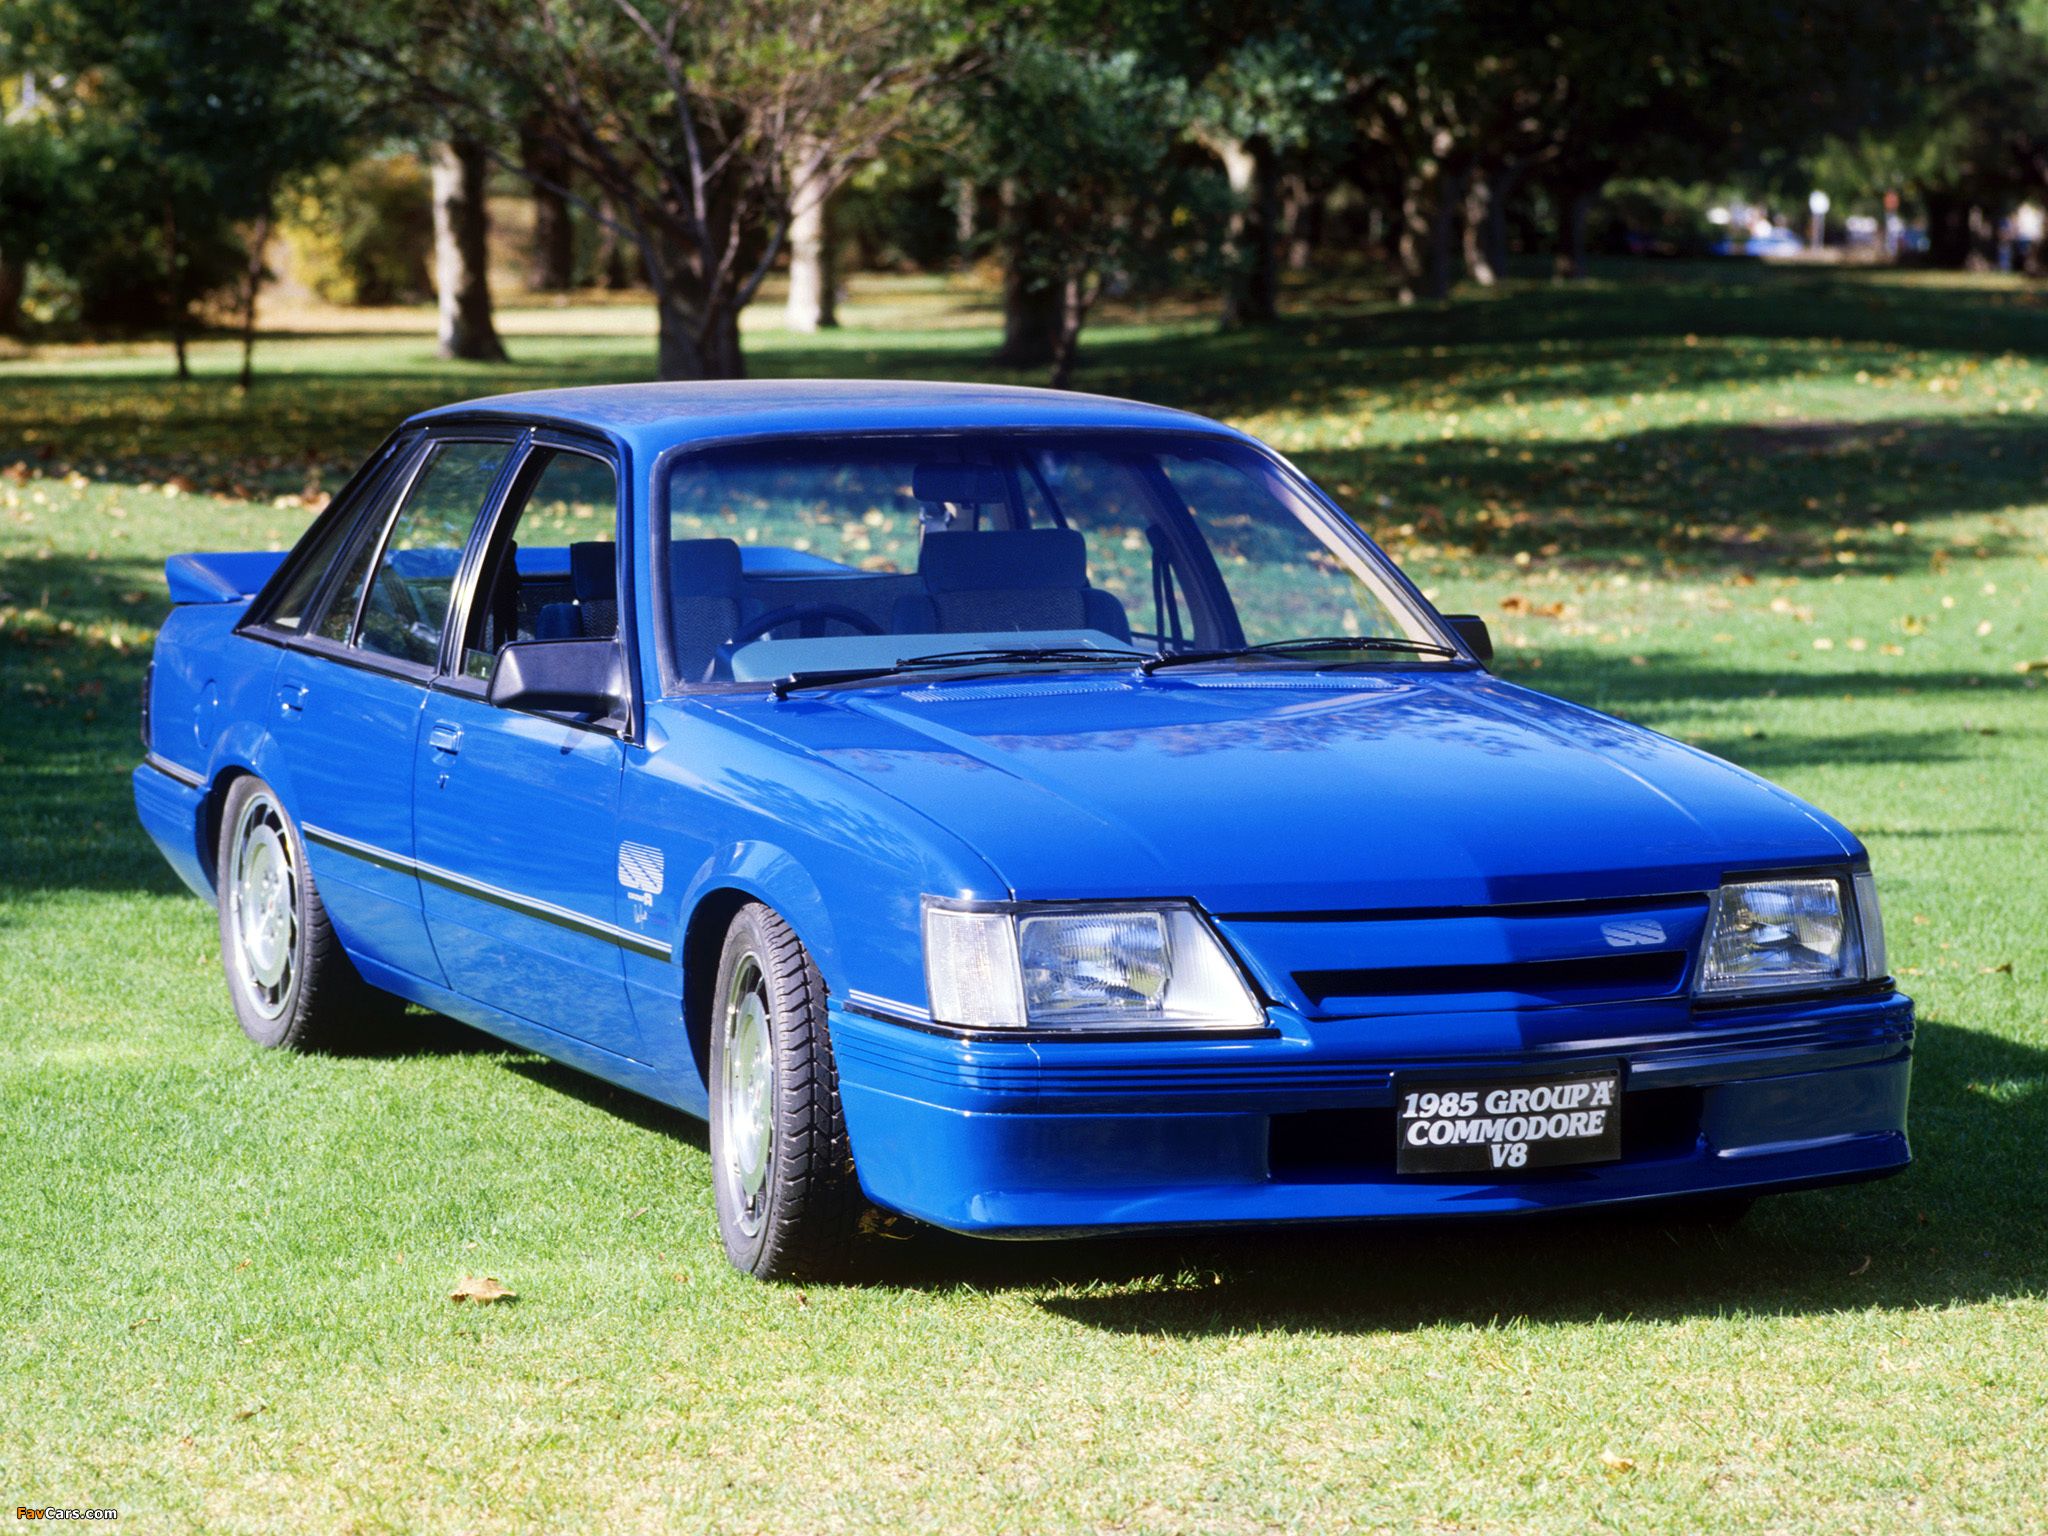 Holden VK Commodore SS Group A 1985 wallpaper (2048x1536)